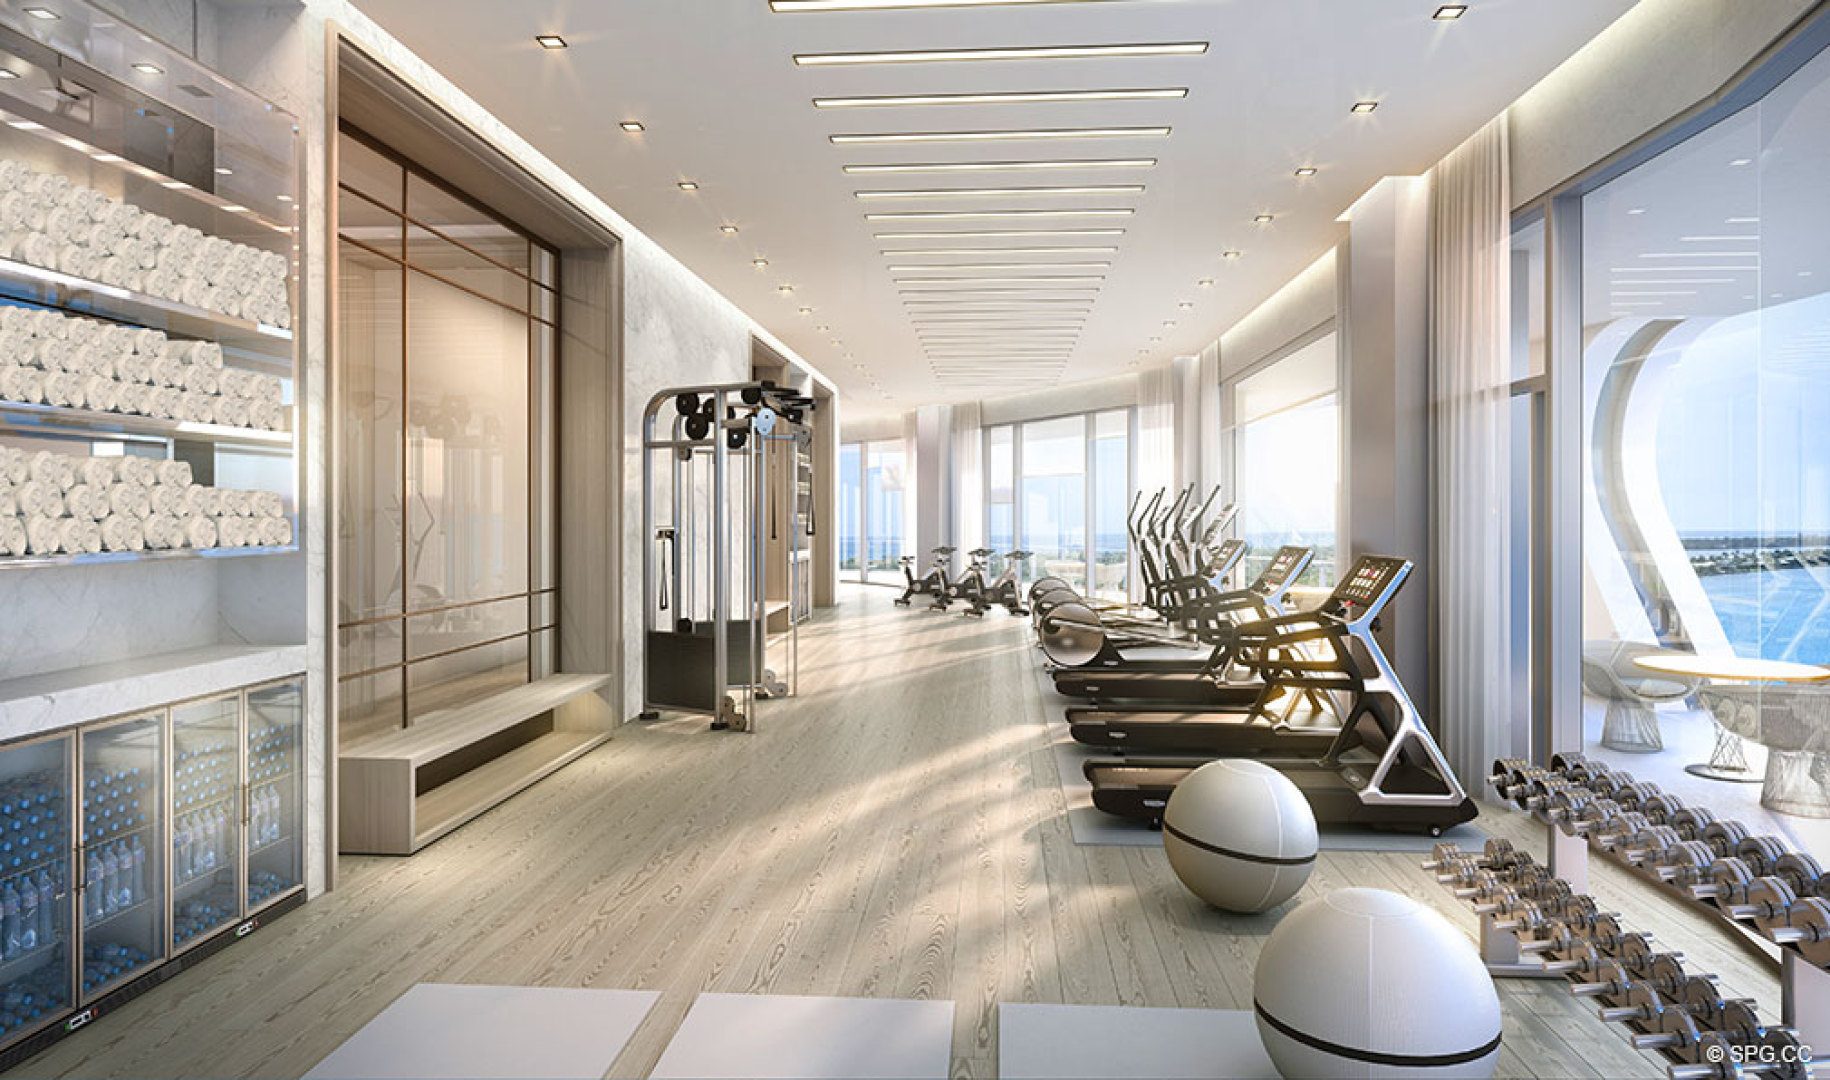 Fitness Center at The Bristol, Luxury Waterfront Condos in West Palm Beach, Florida 33401